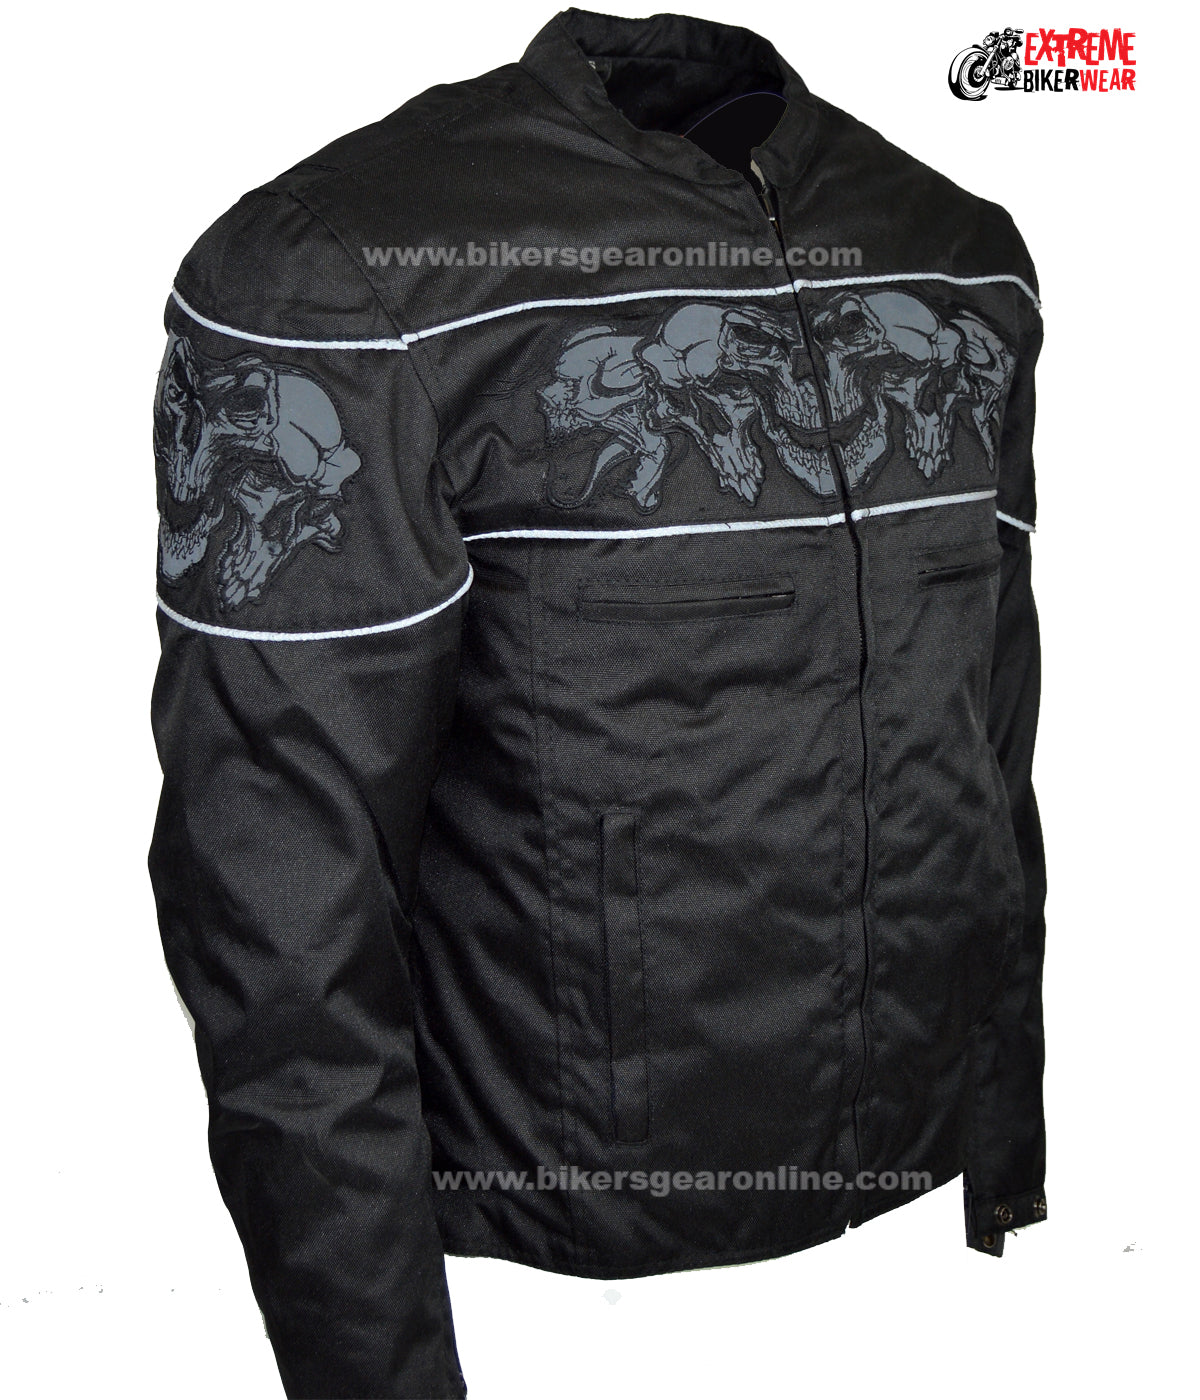 Men's Textile Concealed Carry Racing Jacket with Reflective Skulls